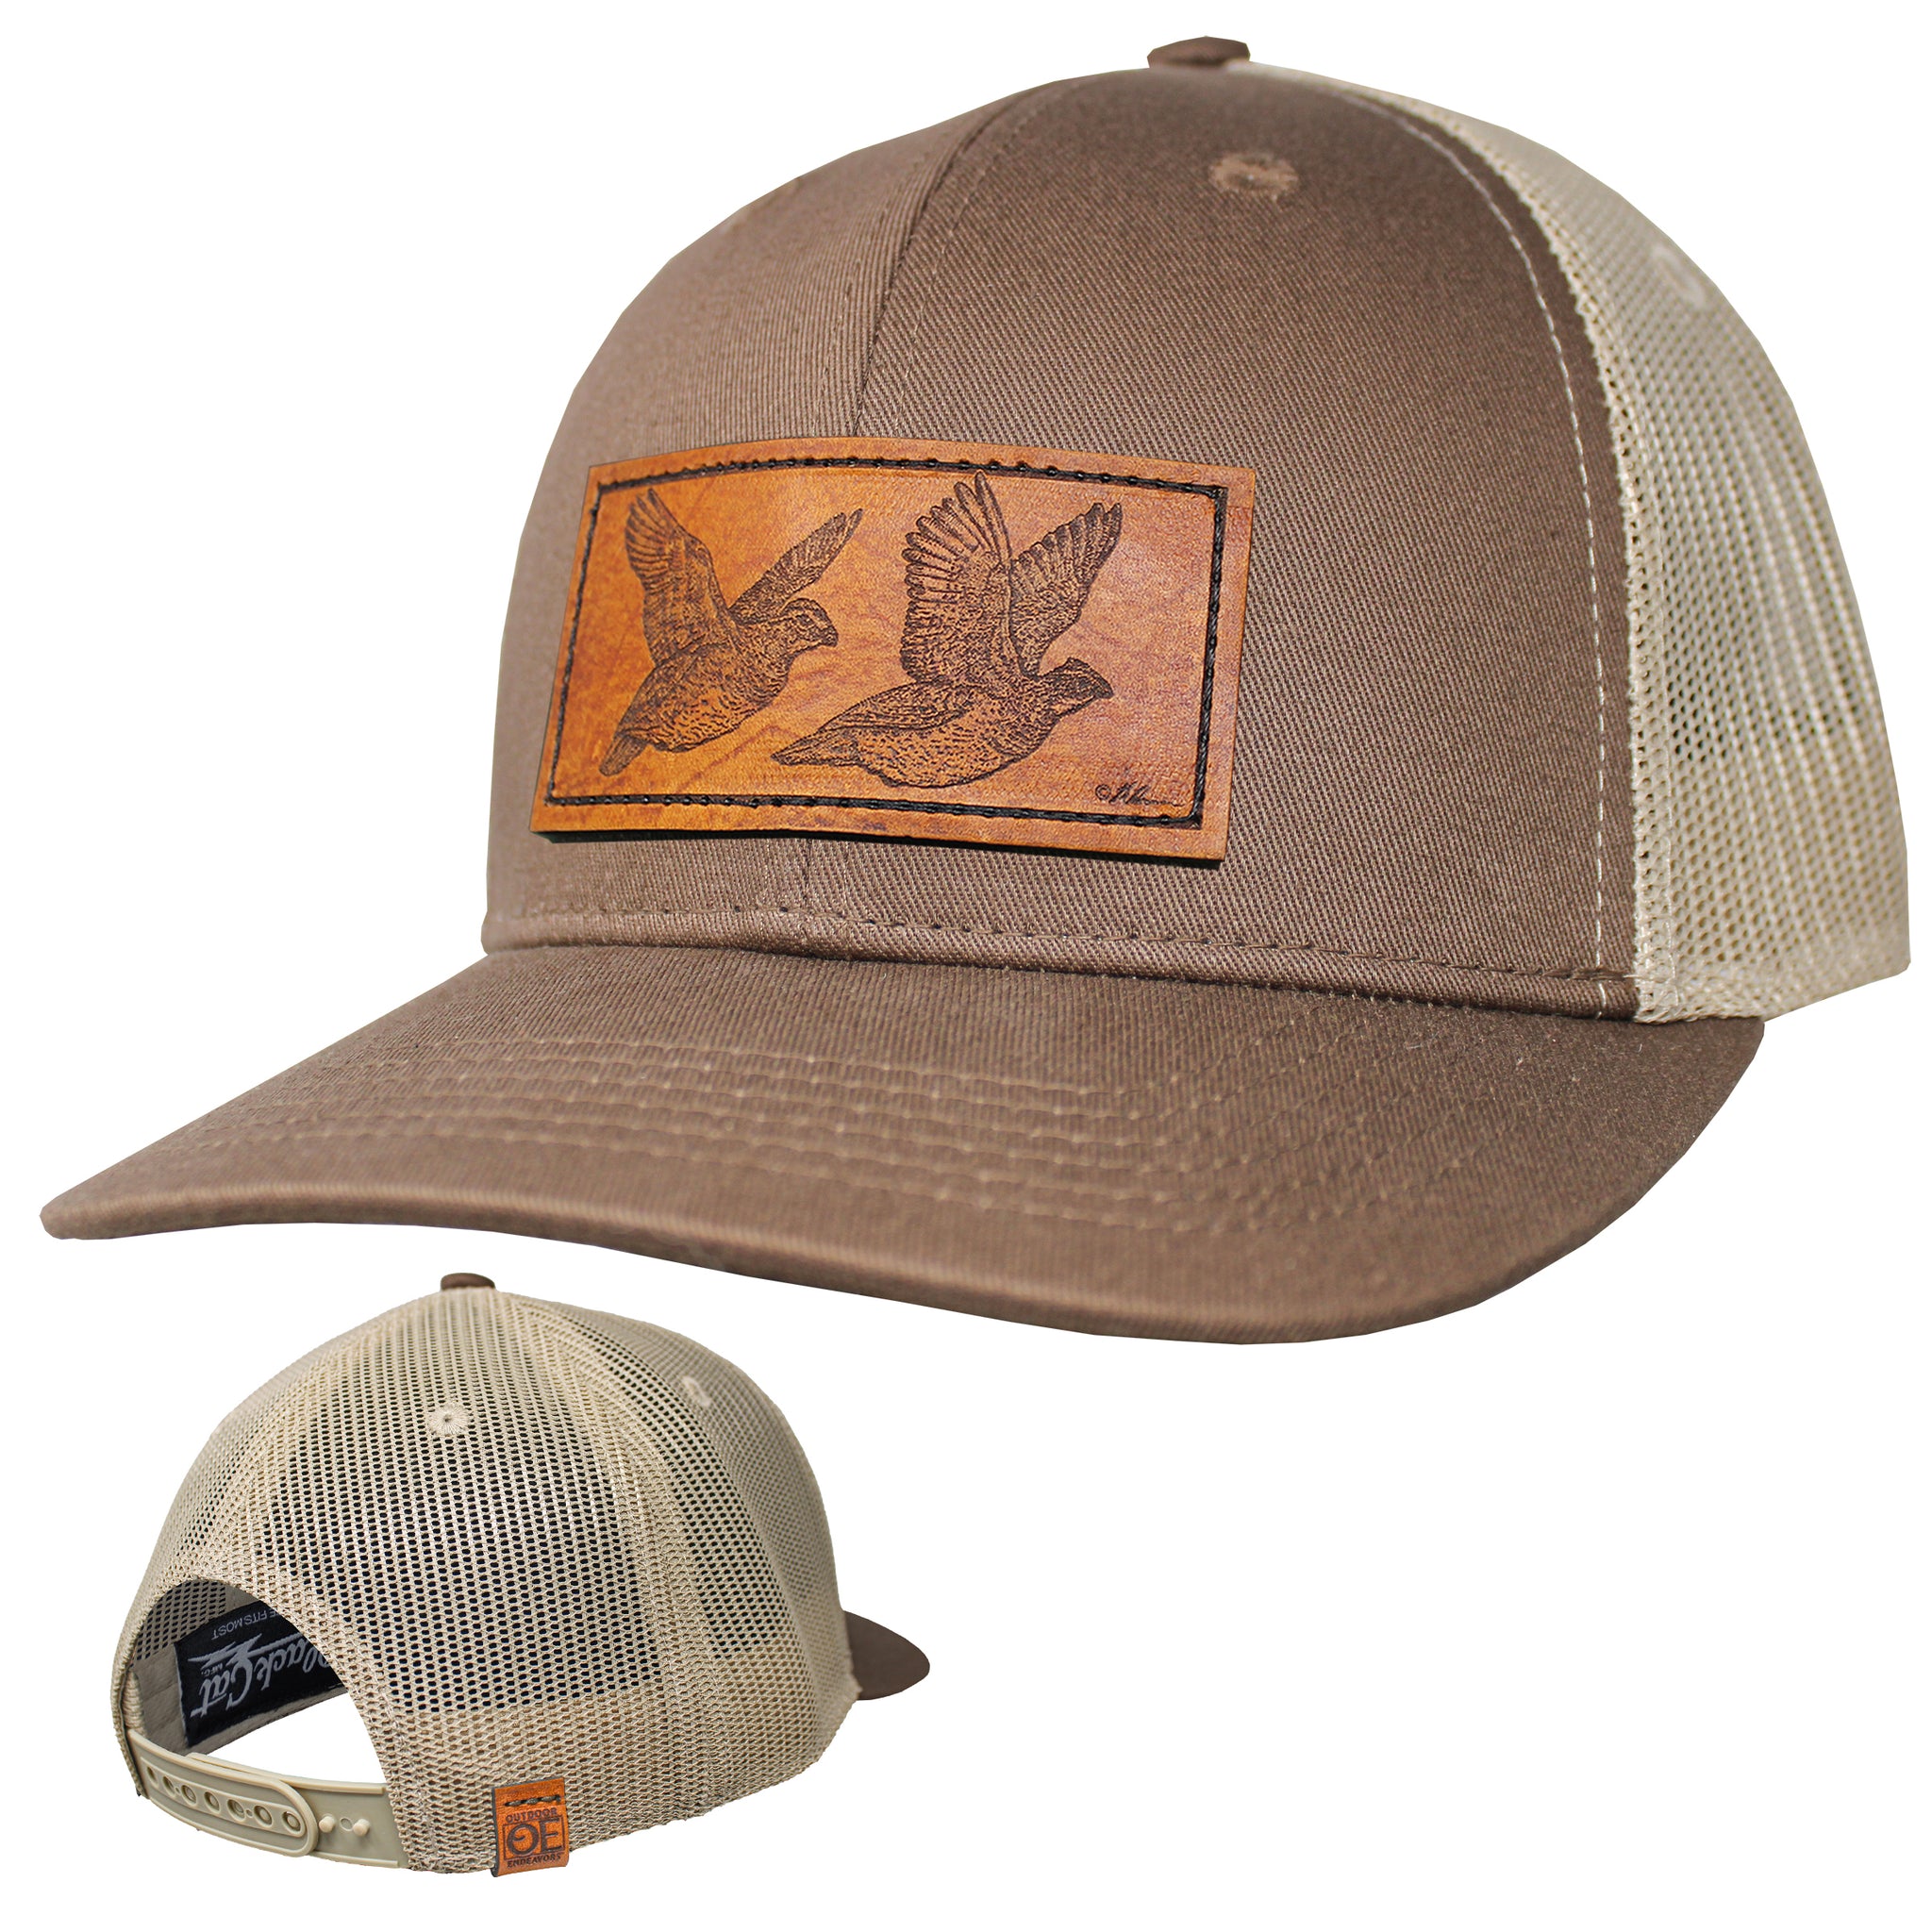 OE - Performance Trucker Hat - Quail Leather Patch